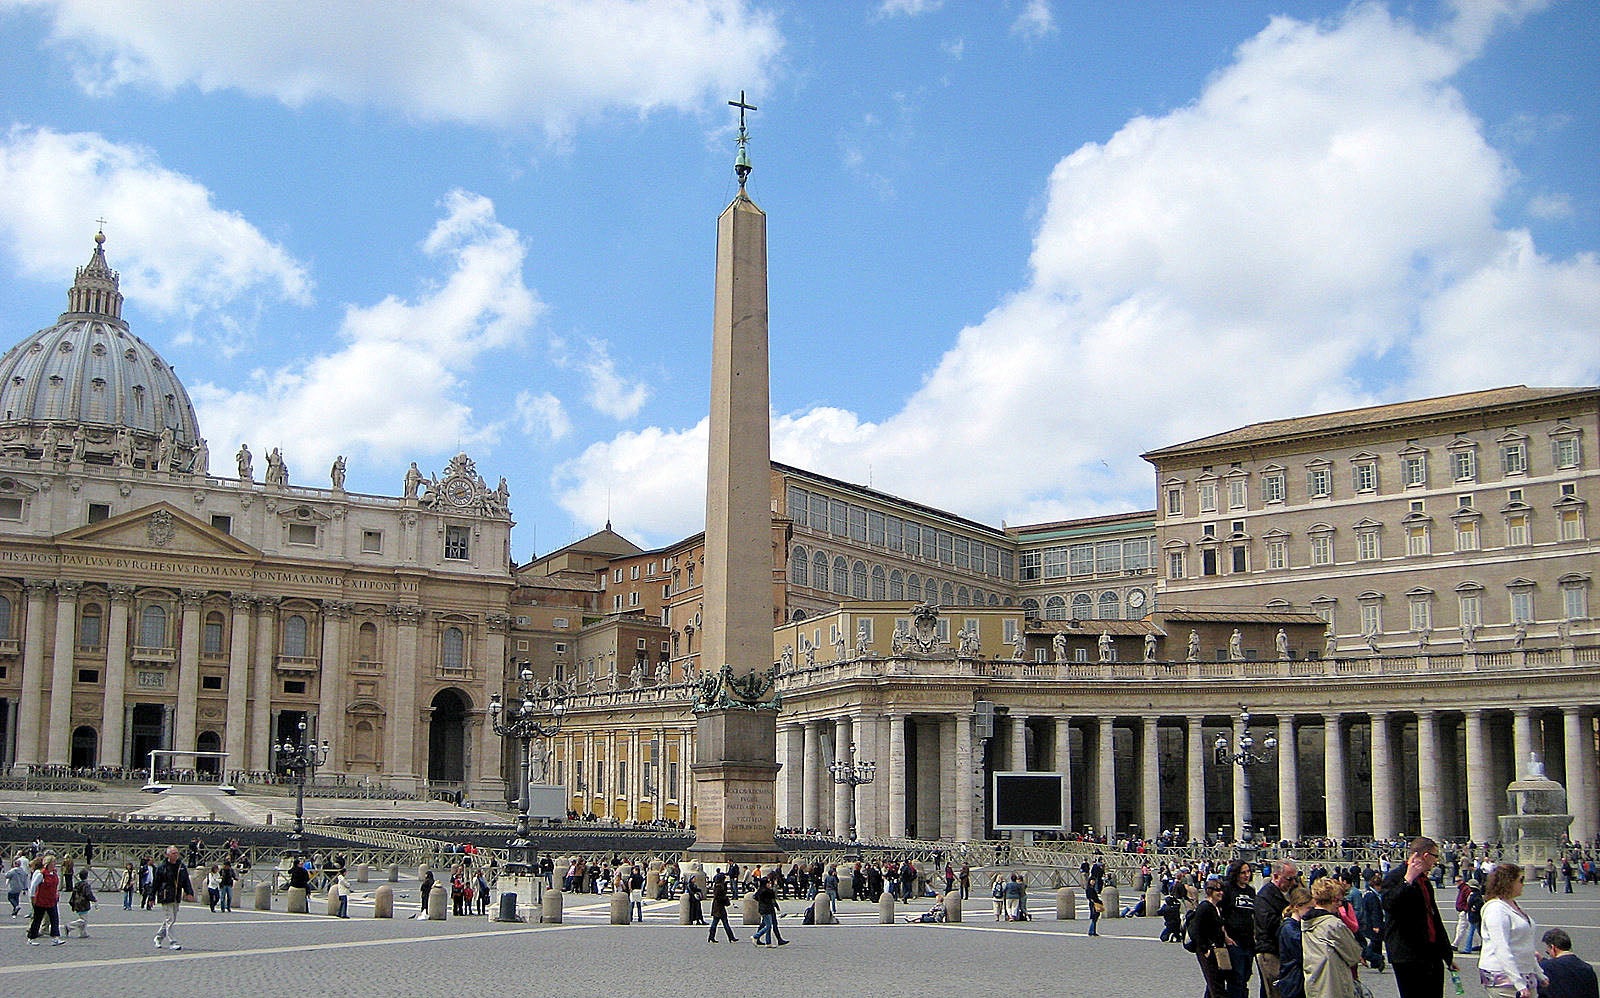 You can find budget accommodation close to the Vatican